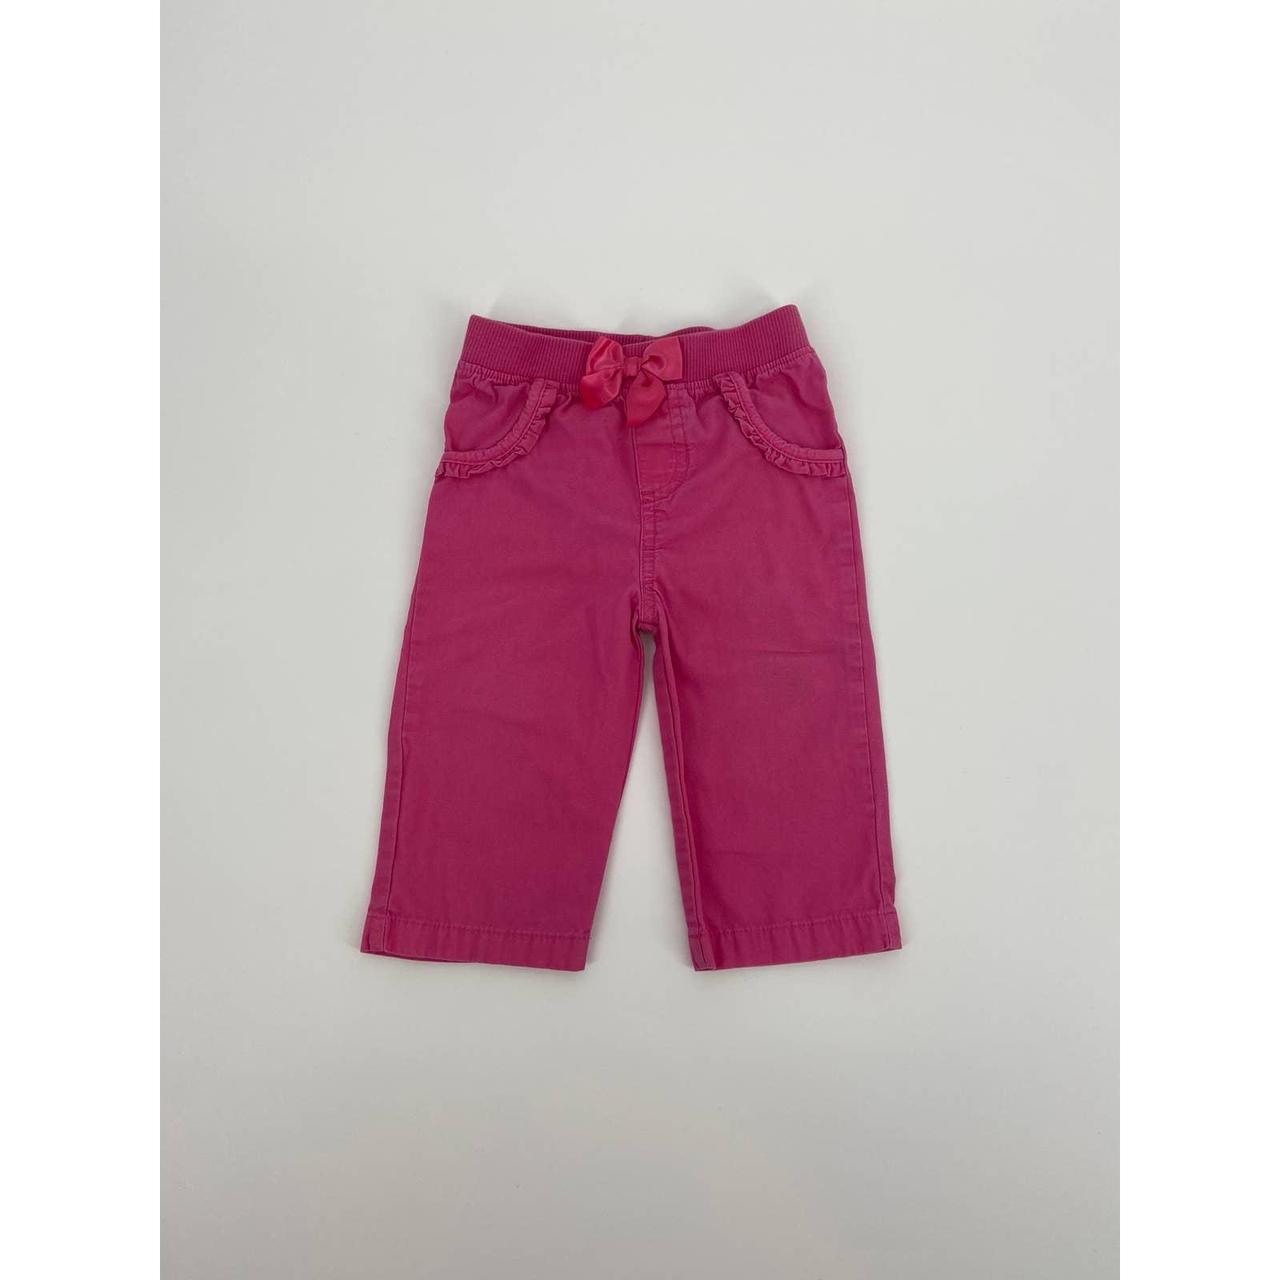 Product Image 1 - Little girls pink pants 12